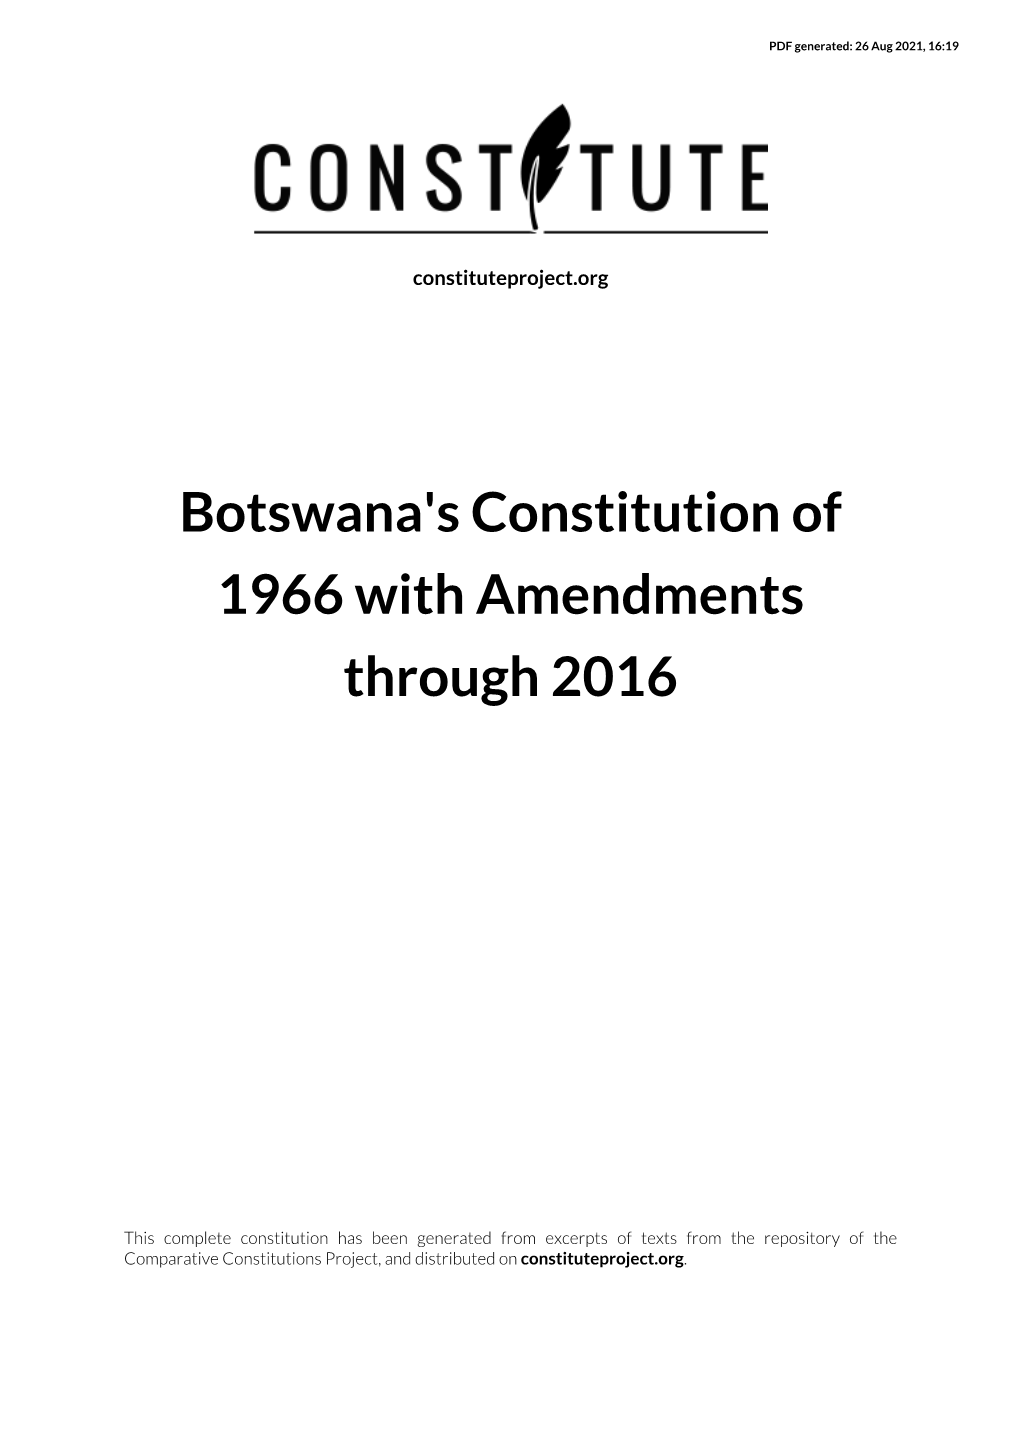 Botswana's Constitution of 1966 with Amendments Through 2016